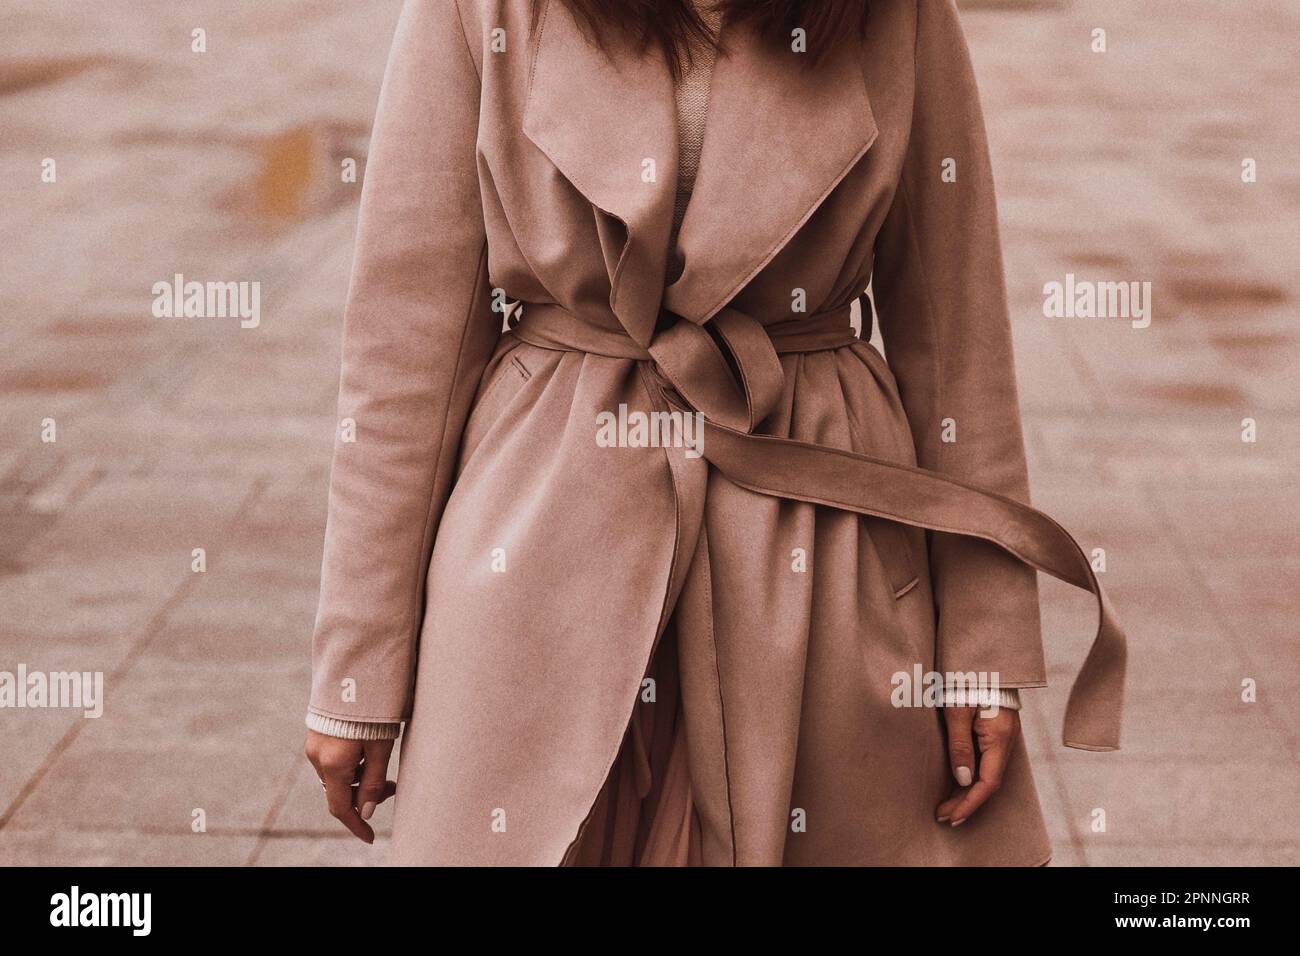 Female figure in the brown long overcoat. Outdoor portrait in daylight. Autumn clothes street style concept Stock Photo